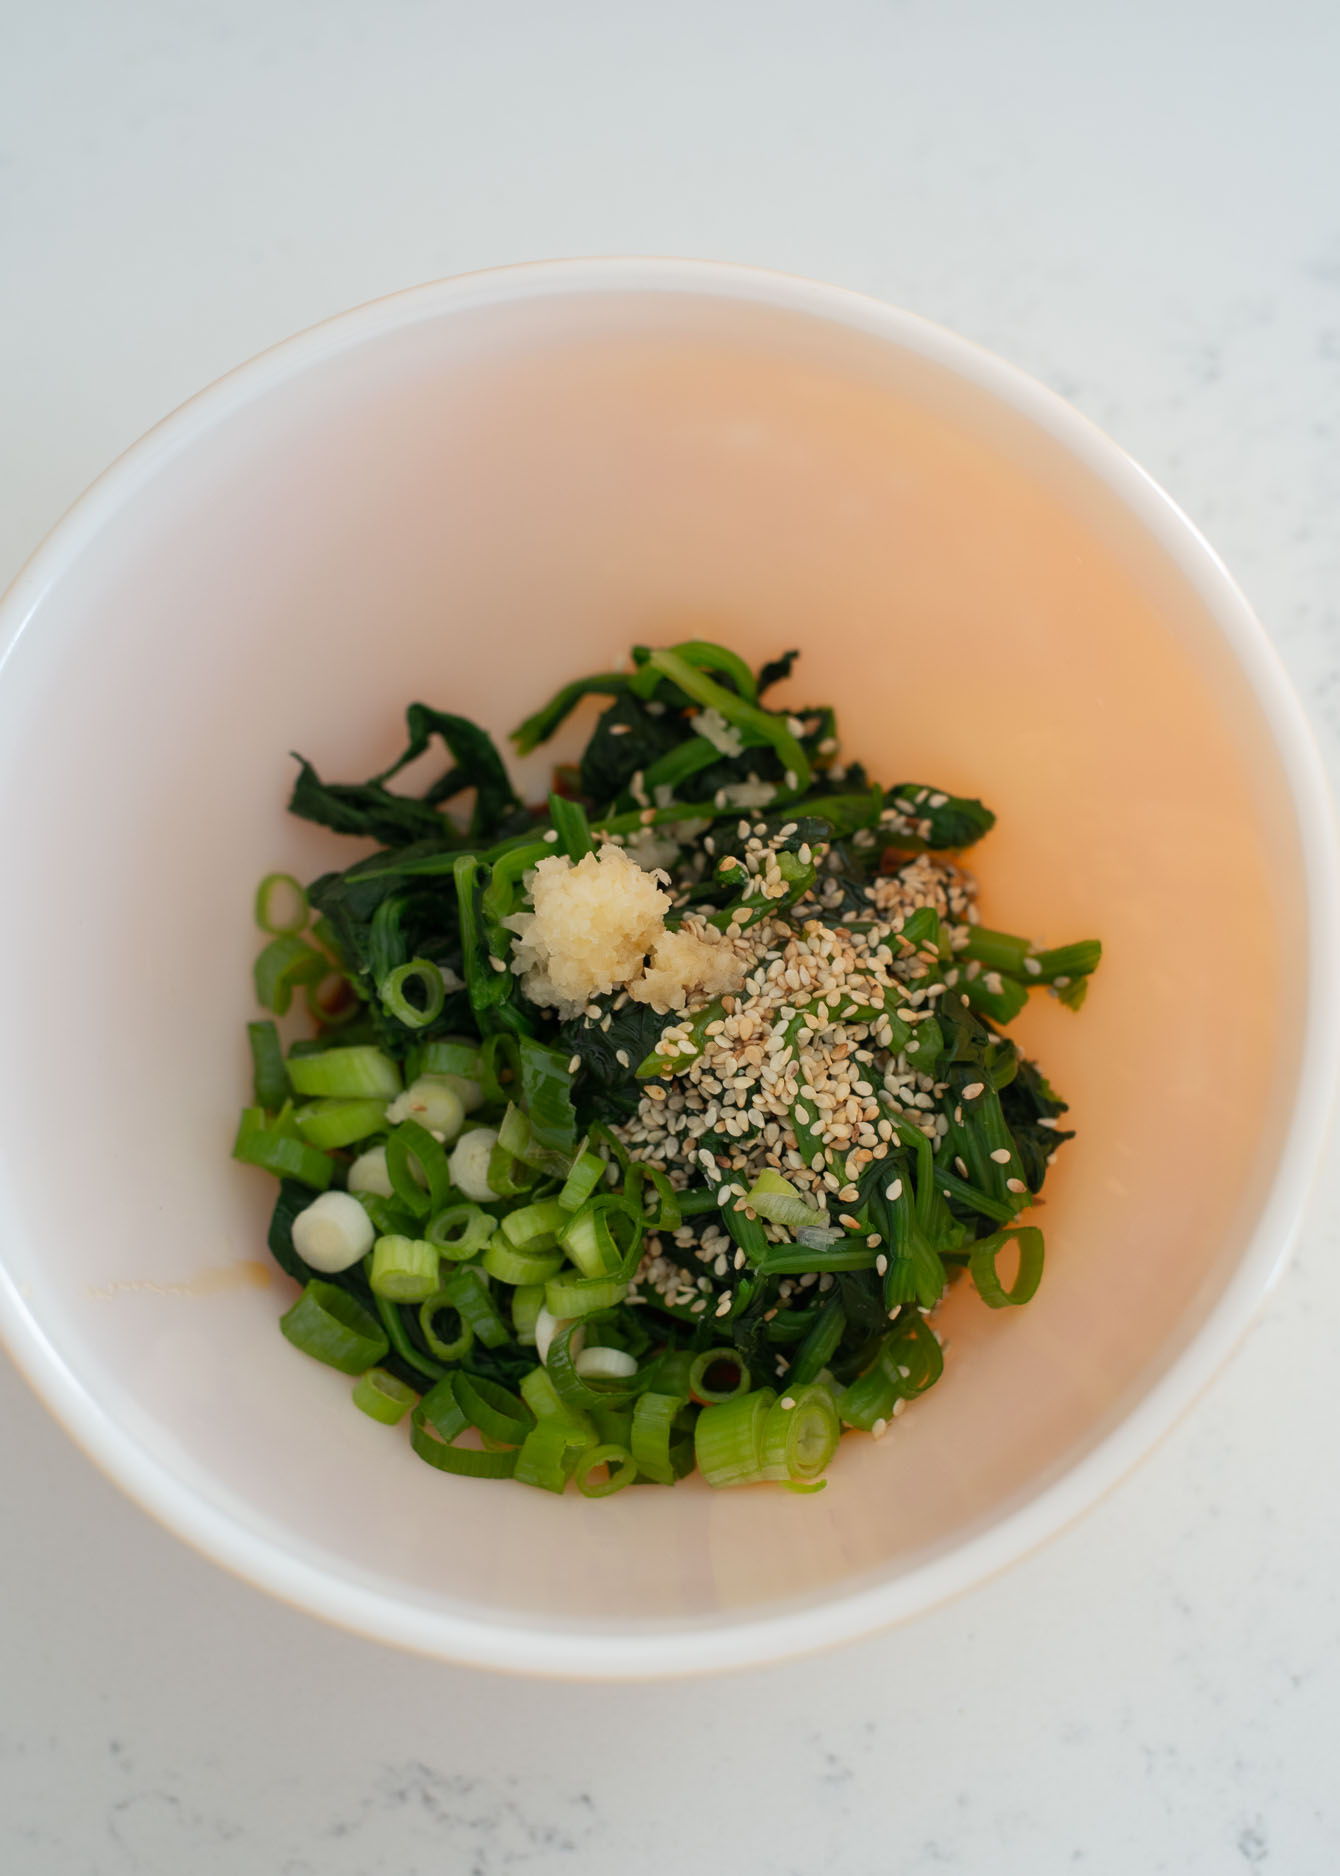 Blanched spinach combined with Korean soy sauce seasoning in a bowl.